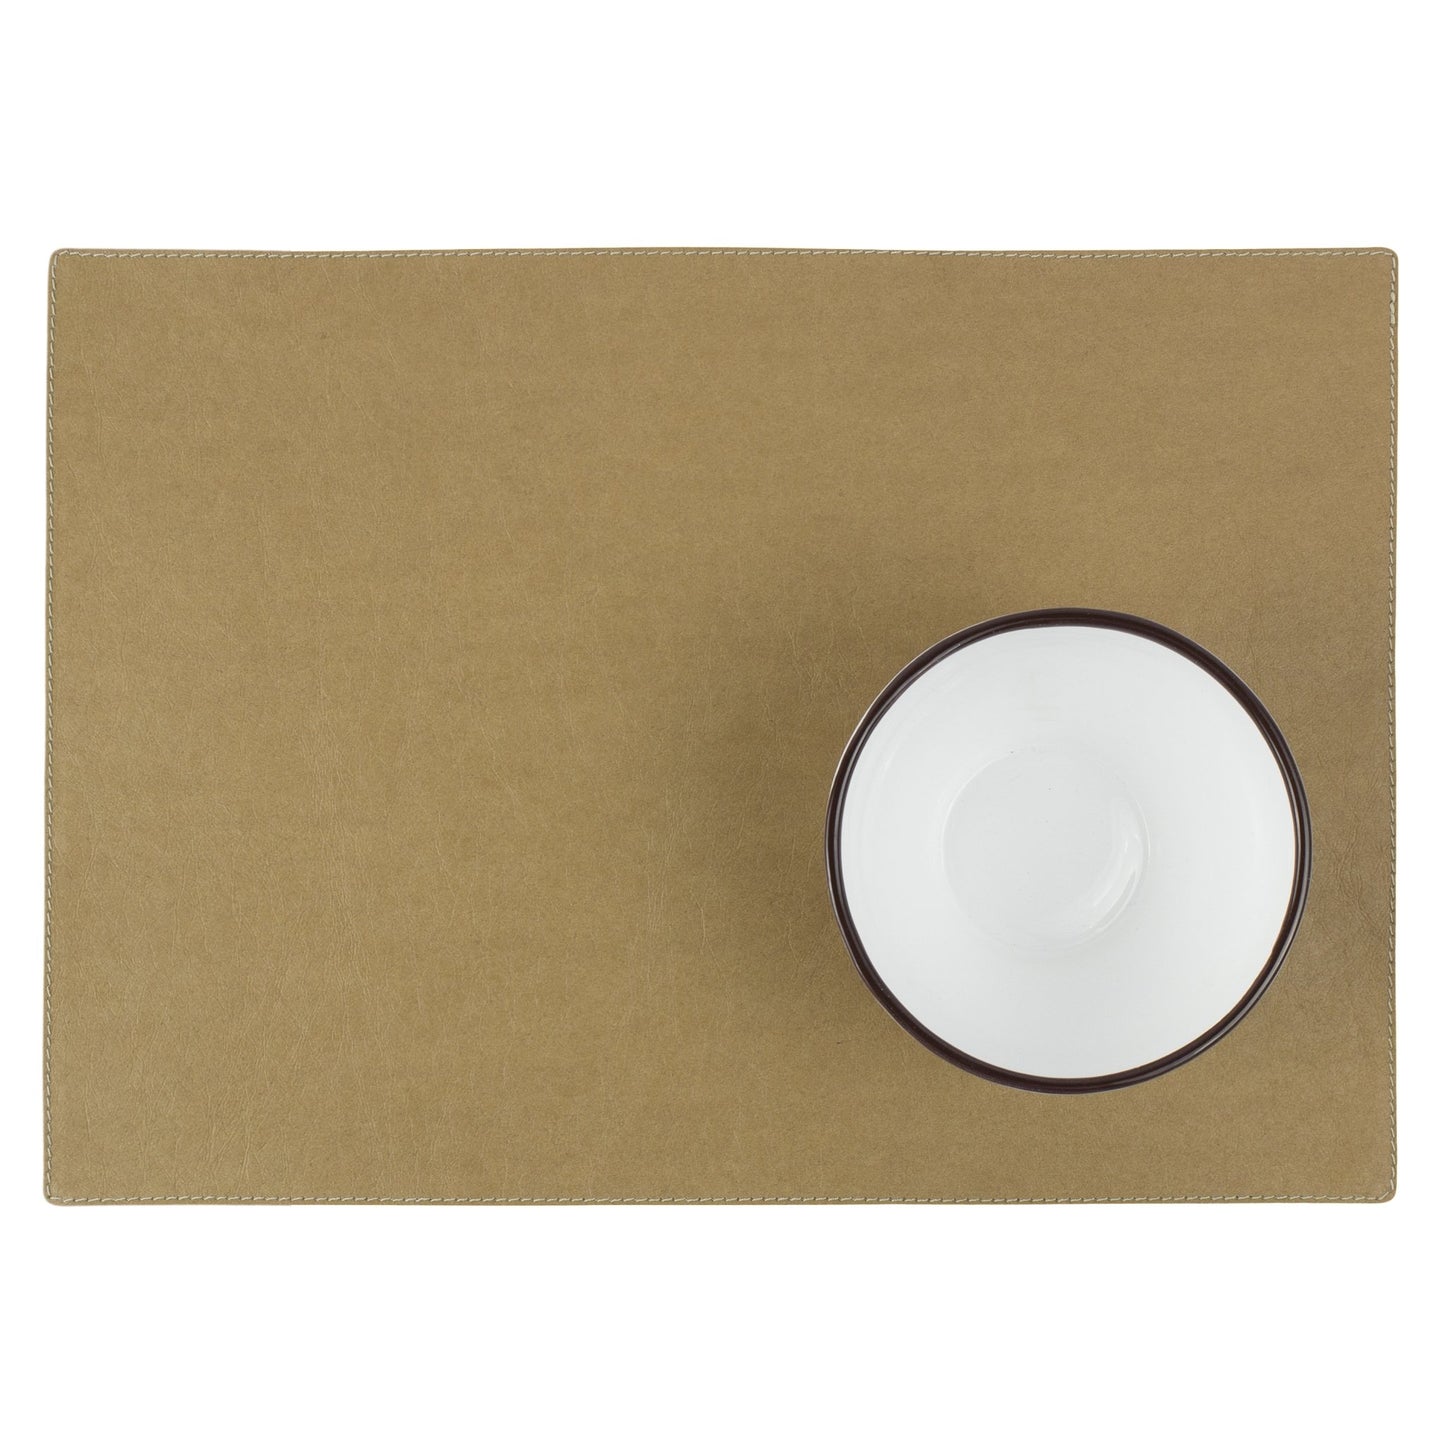 A rectangular washable paper placemat is shown with a small white bowl on the bottom left corner. The placemat is tan.